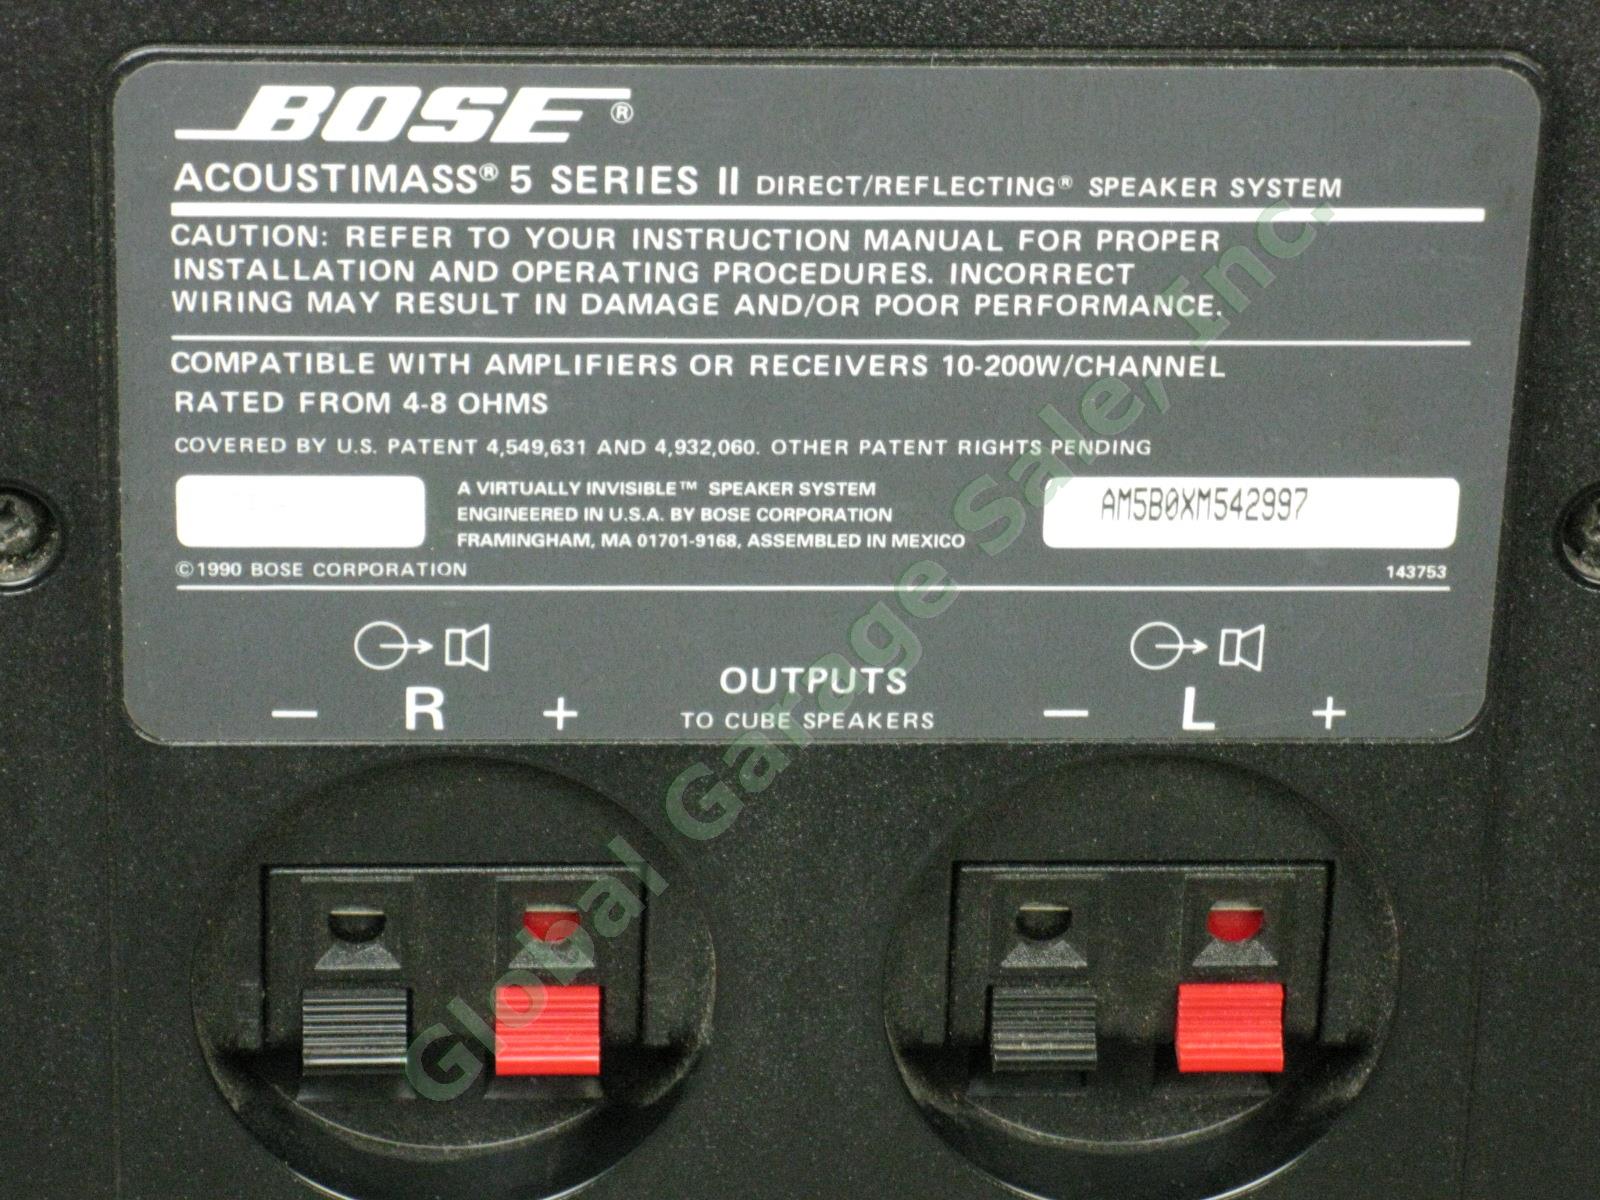 Bose Acoustimass 5 Series II Stereo Speaker System Black One Owner Exc Cond NR! 5